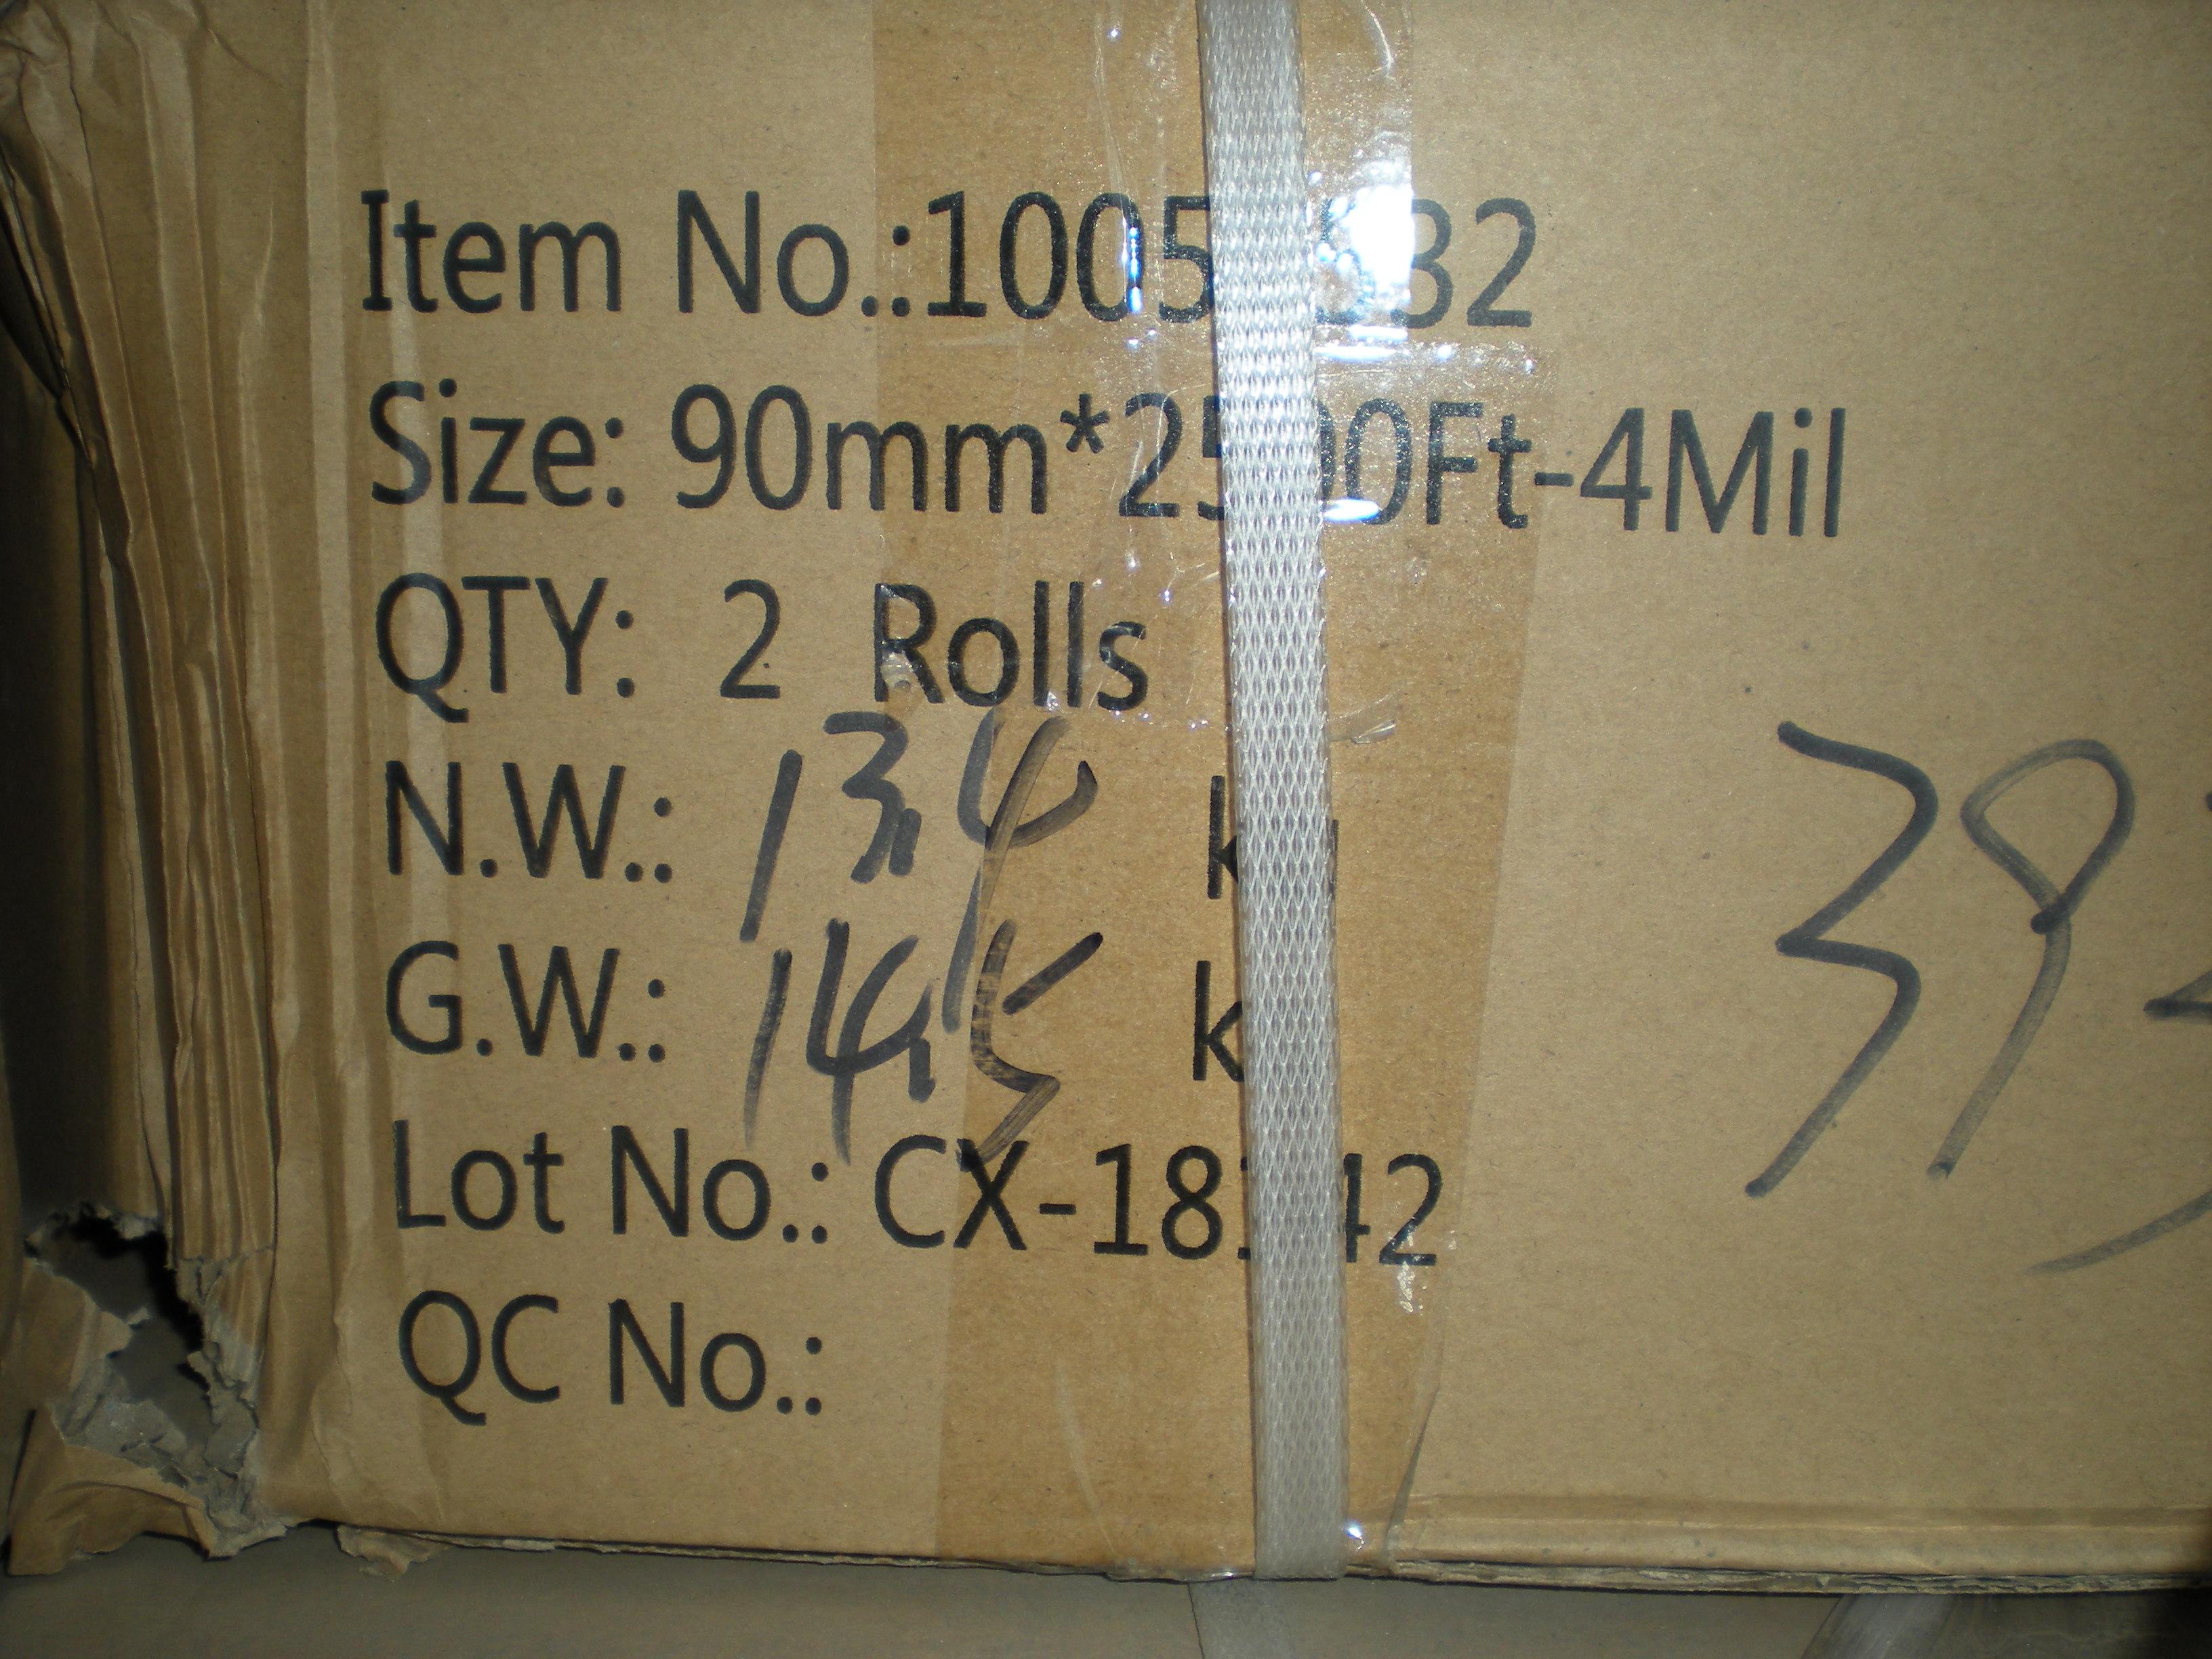 Pallet of clear barrier film,90mm x 2500',2 rolls per case,approx 62 cases